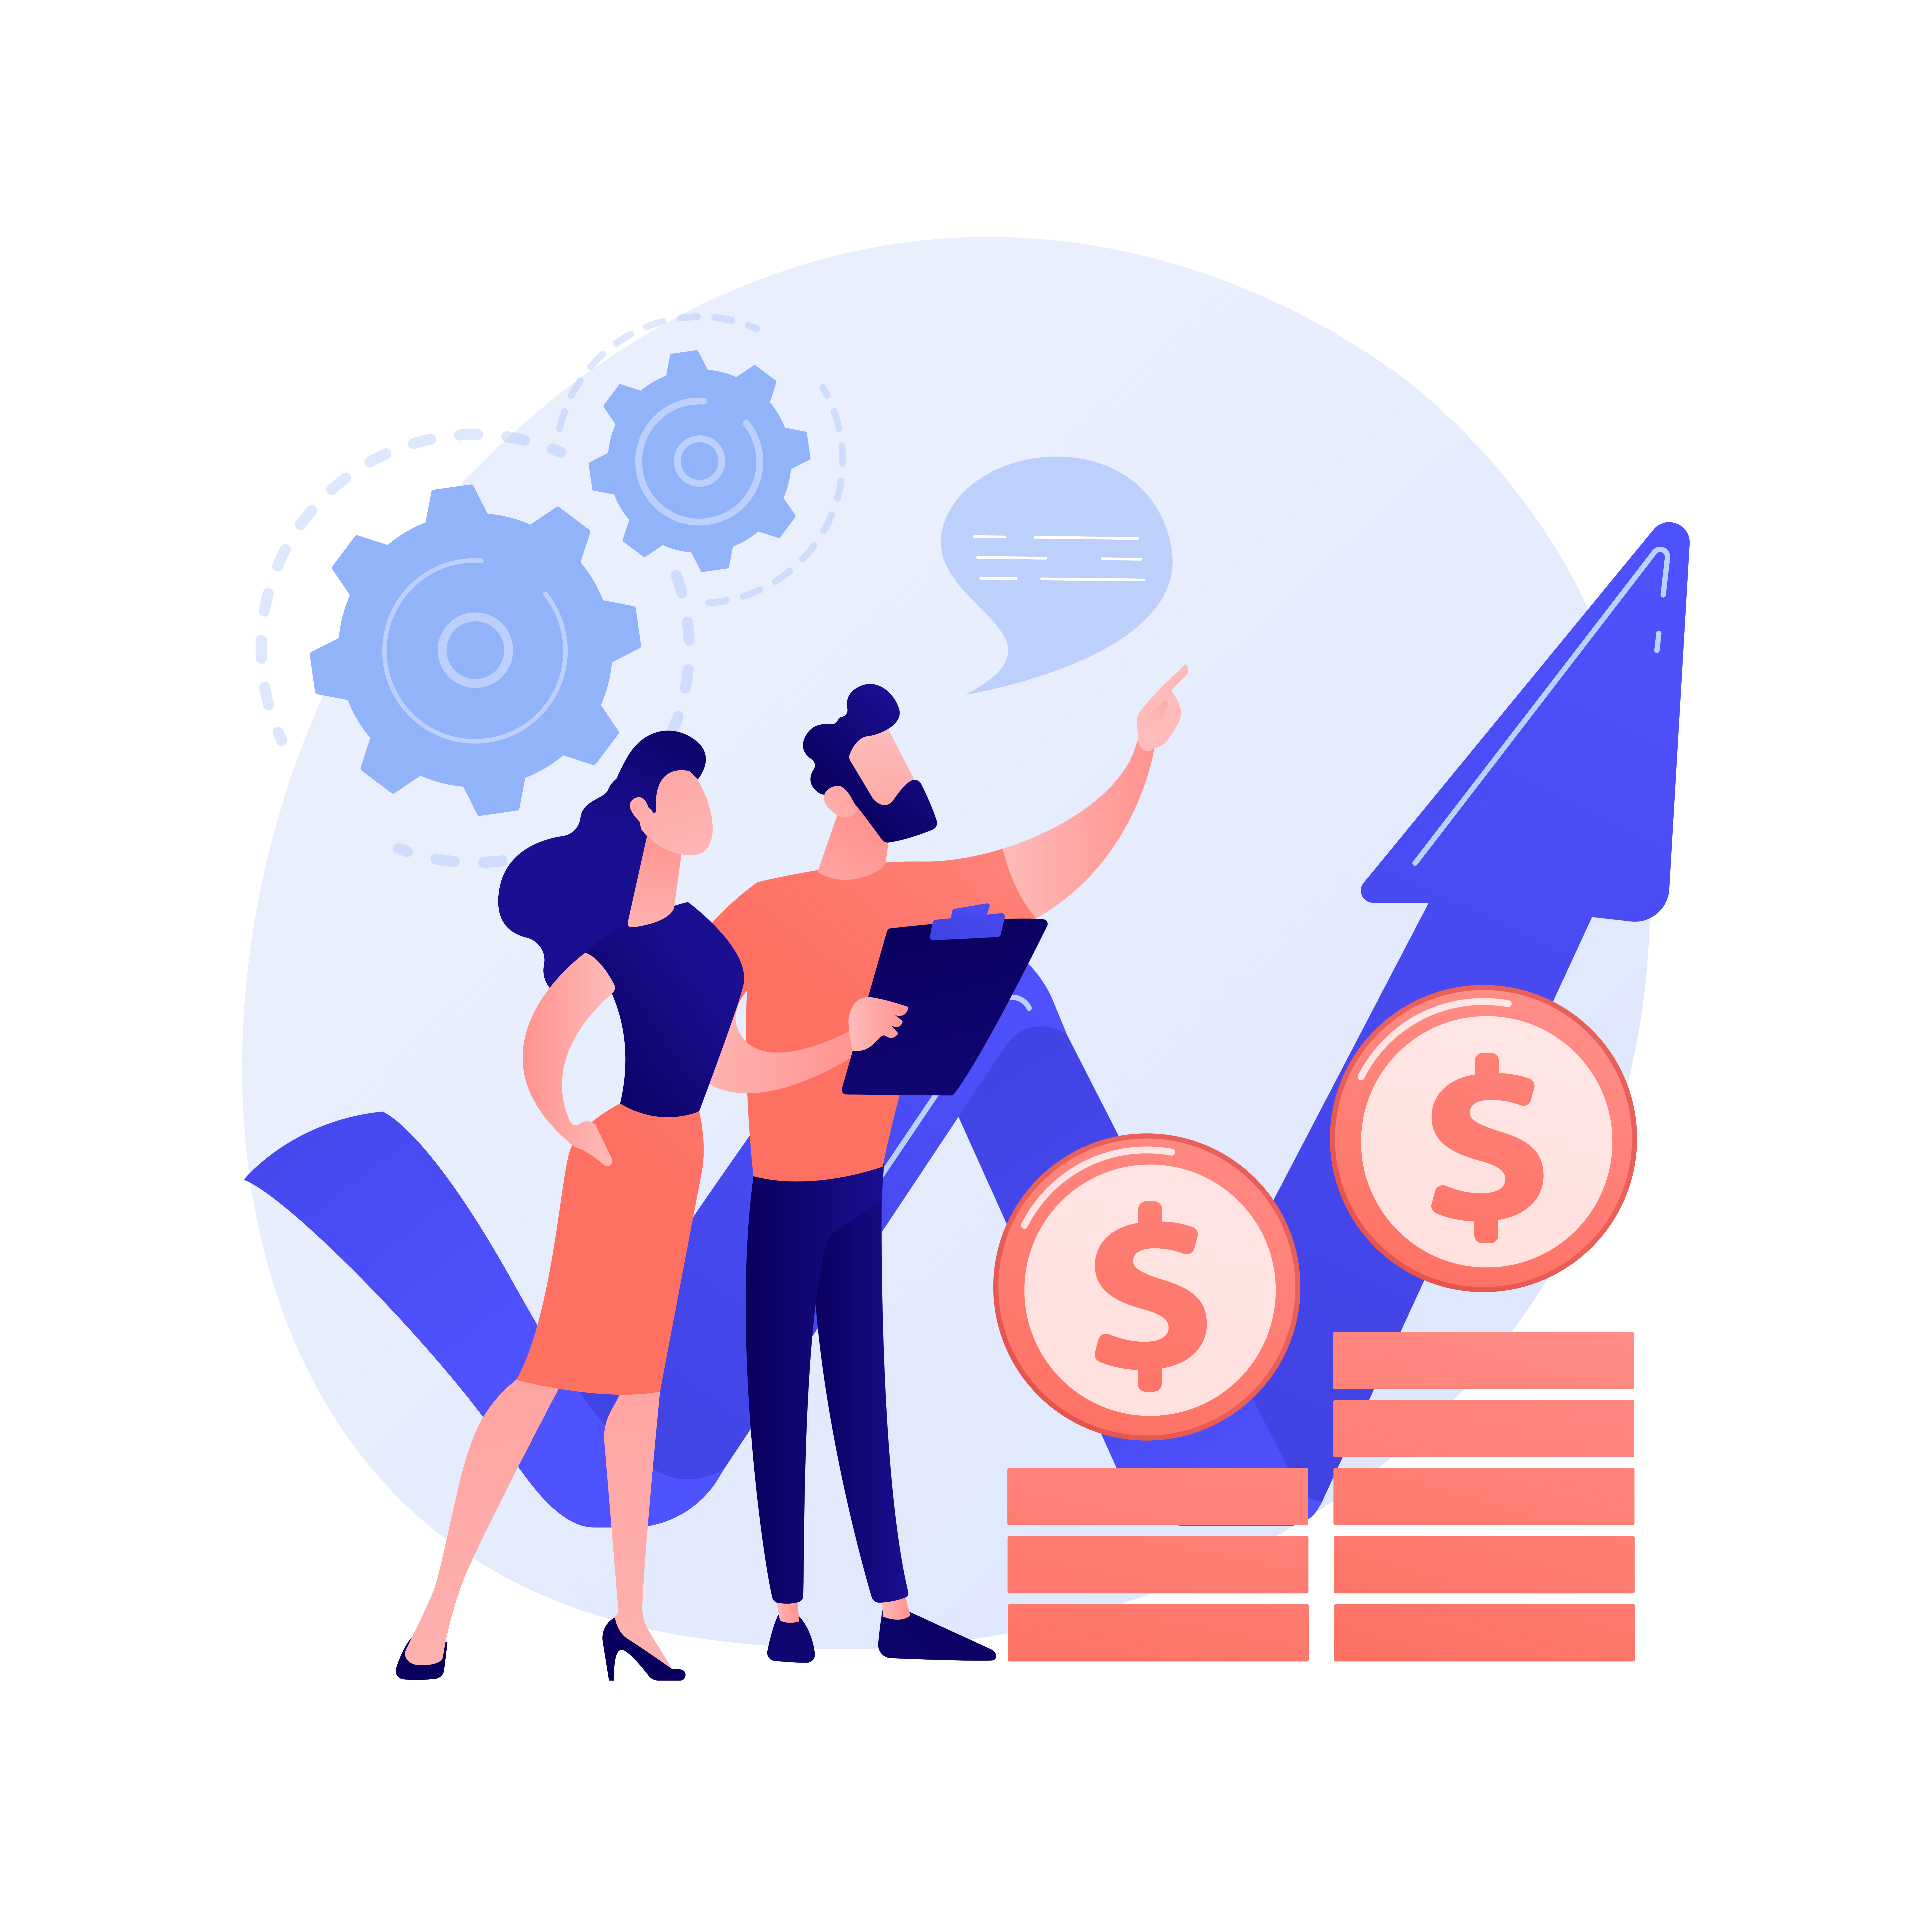 Income increase strategy. Business management, stock brokers statistics, financiers forecast. Financial market experts analyzing growth rates. Vector isolated concept metaphor illustration